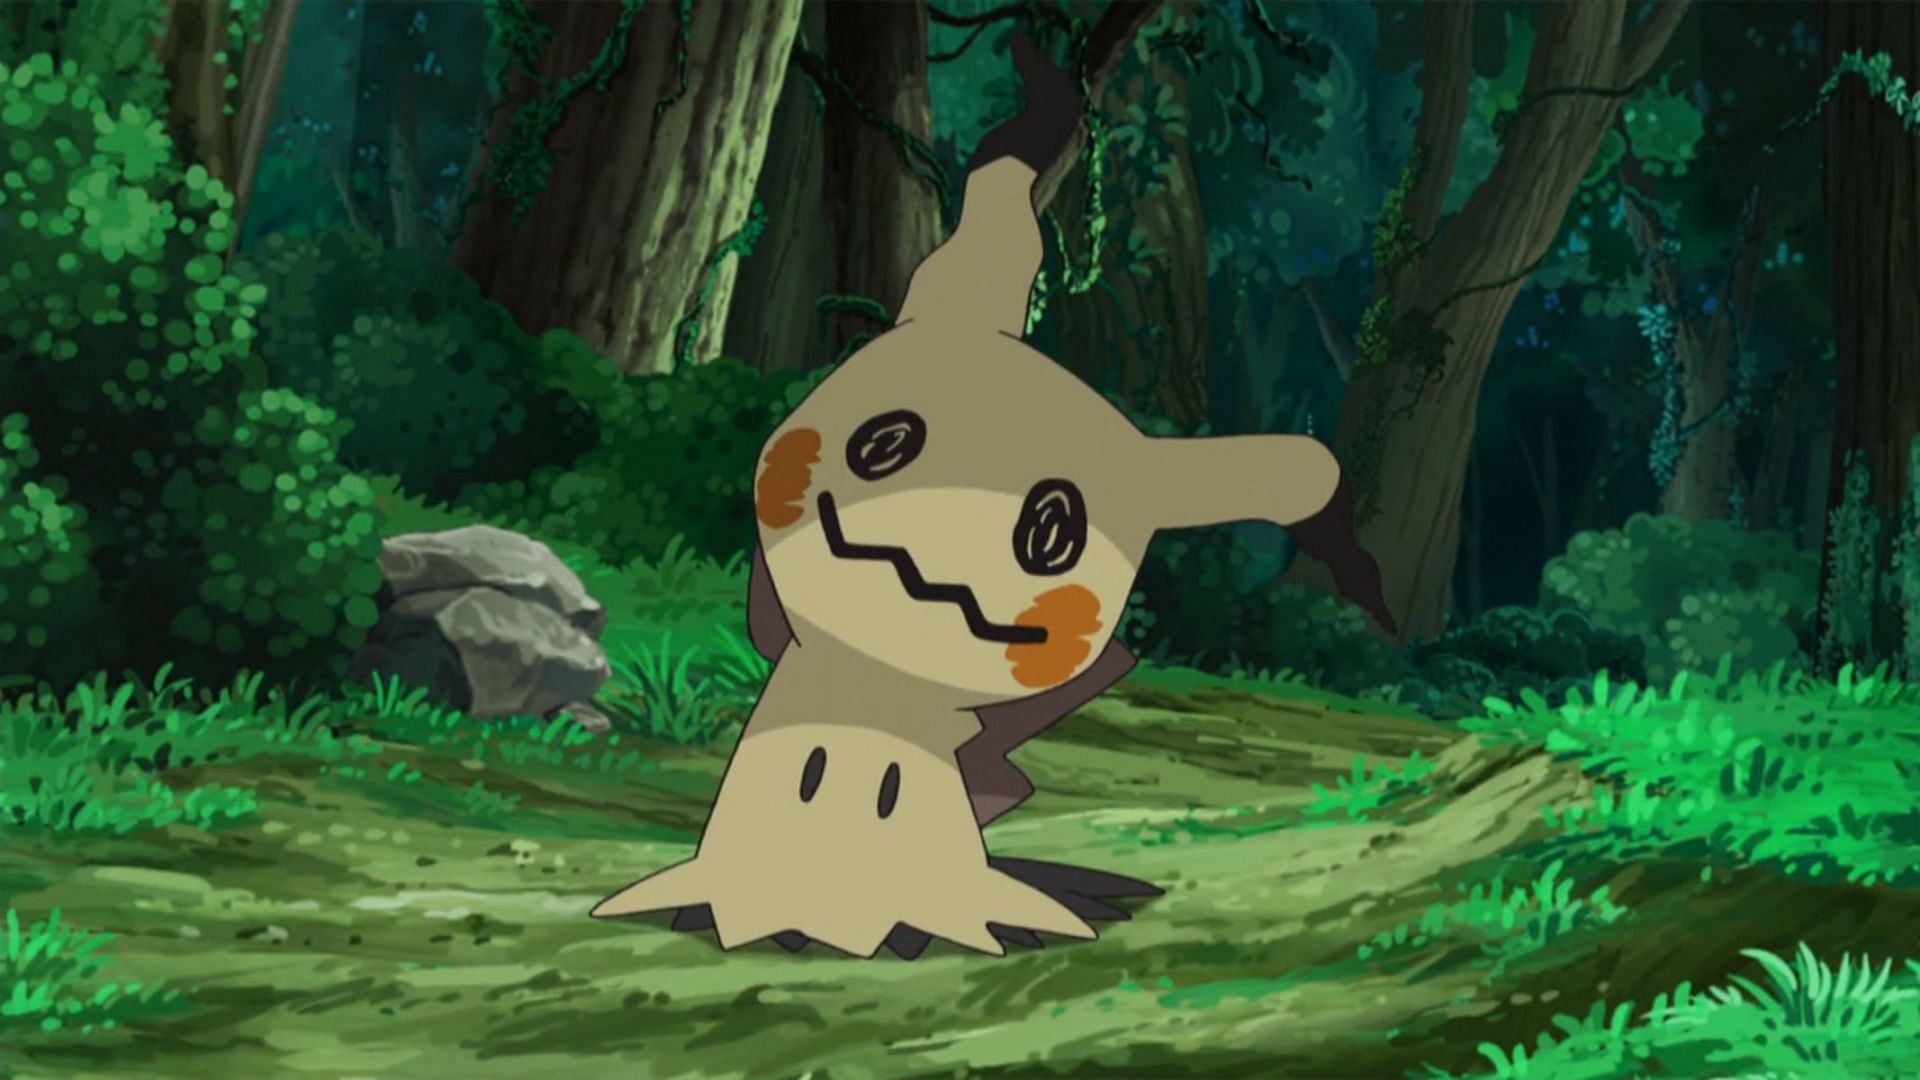 Mimikyu is not yet available in Pokemon GO